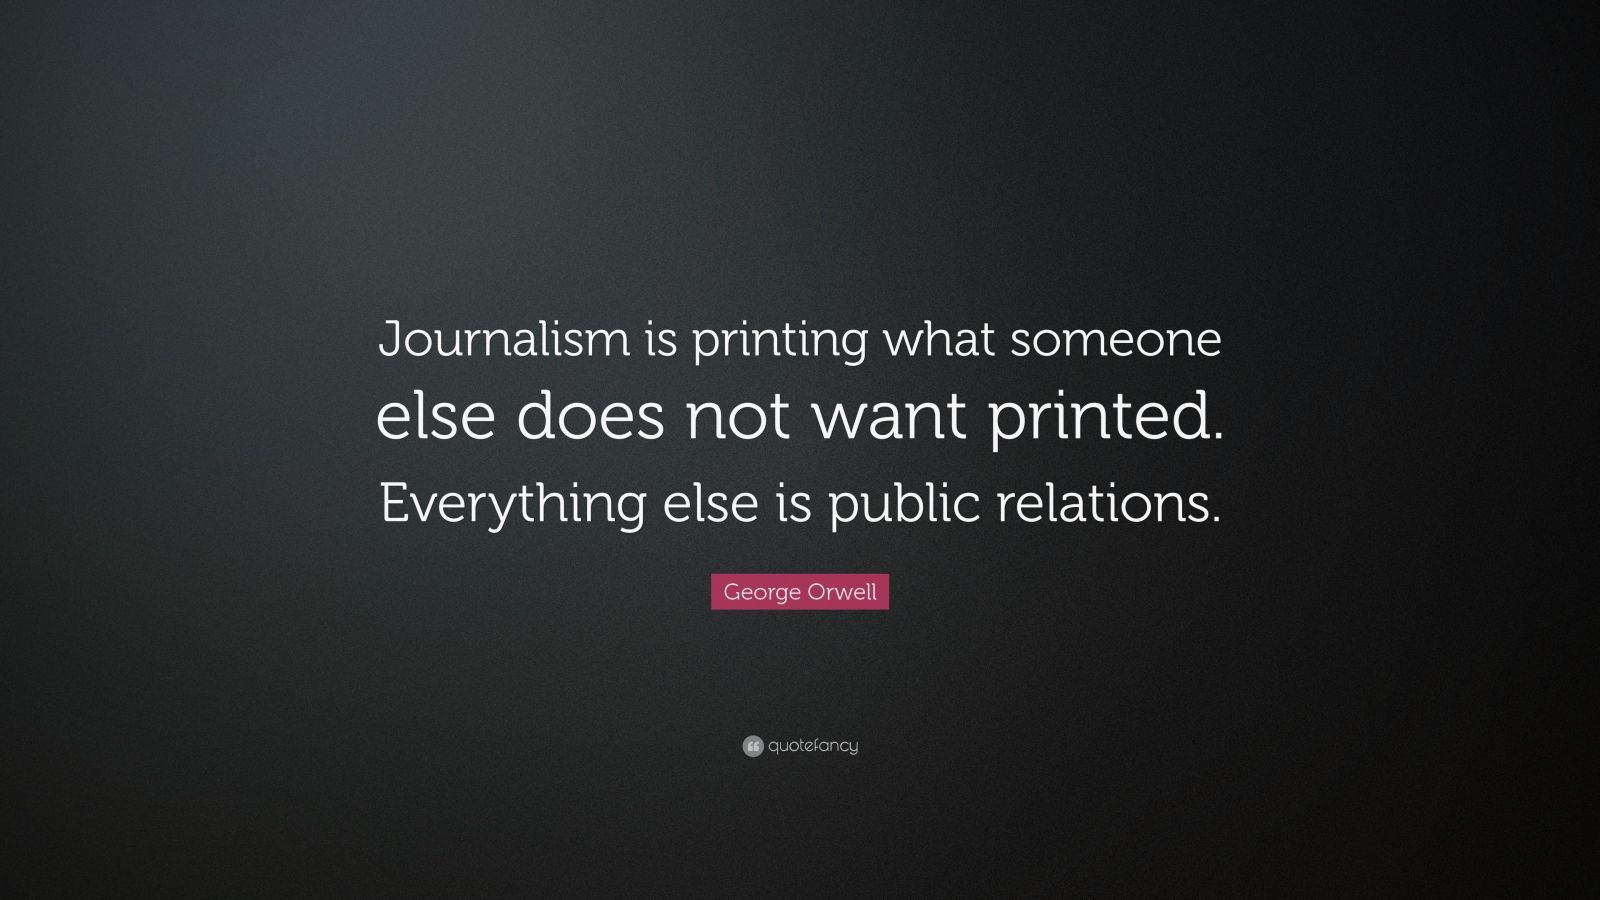 George Orwell Quote: “Journalism is printing what someone else does not